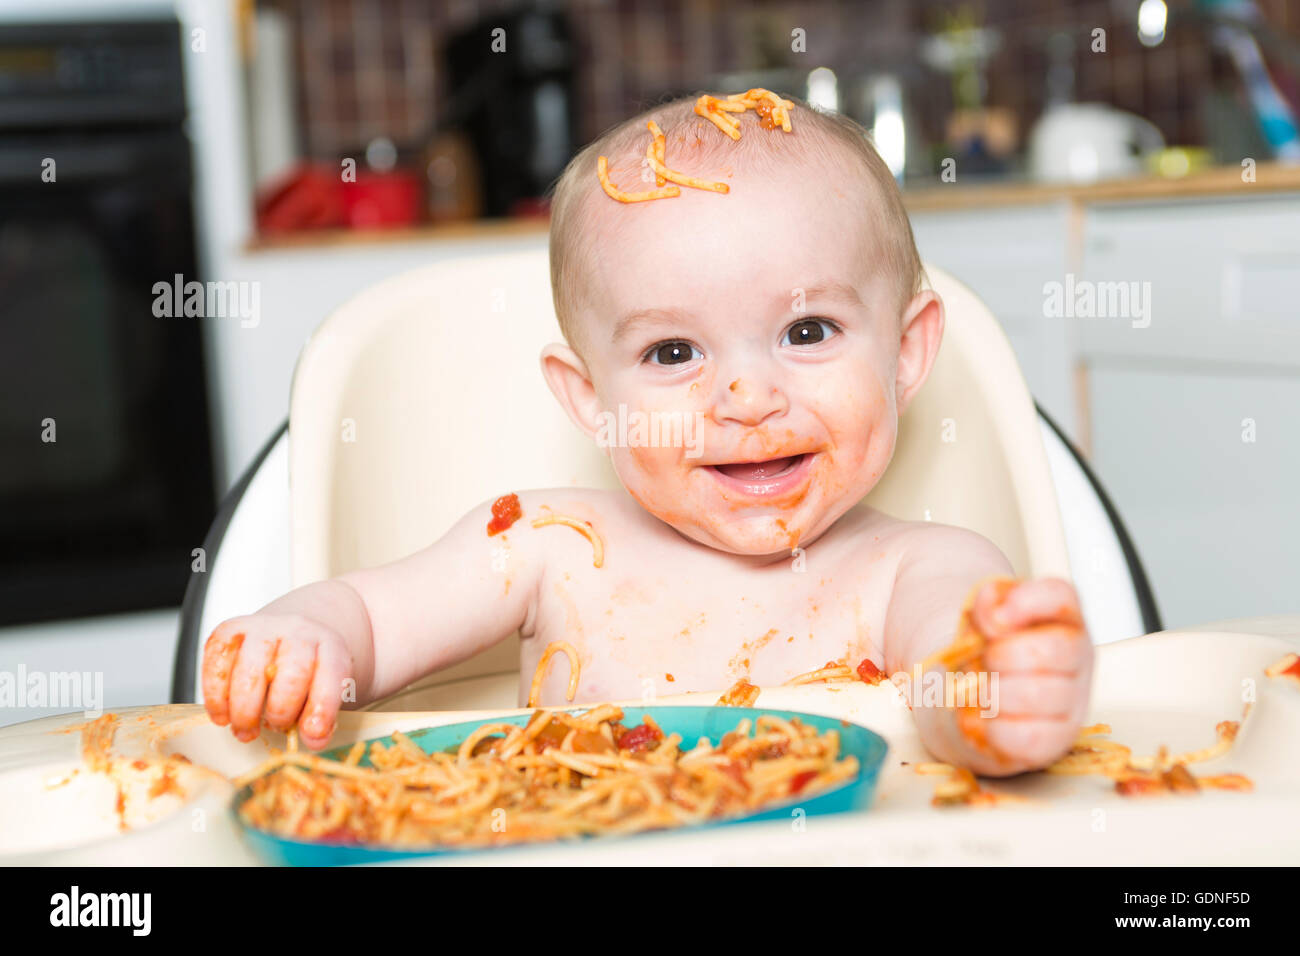 Little b eating her dinner and making a mess Stock Photo